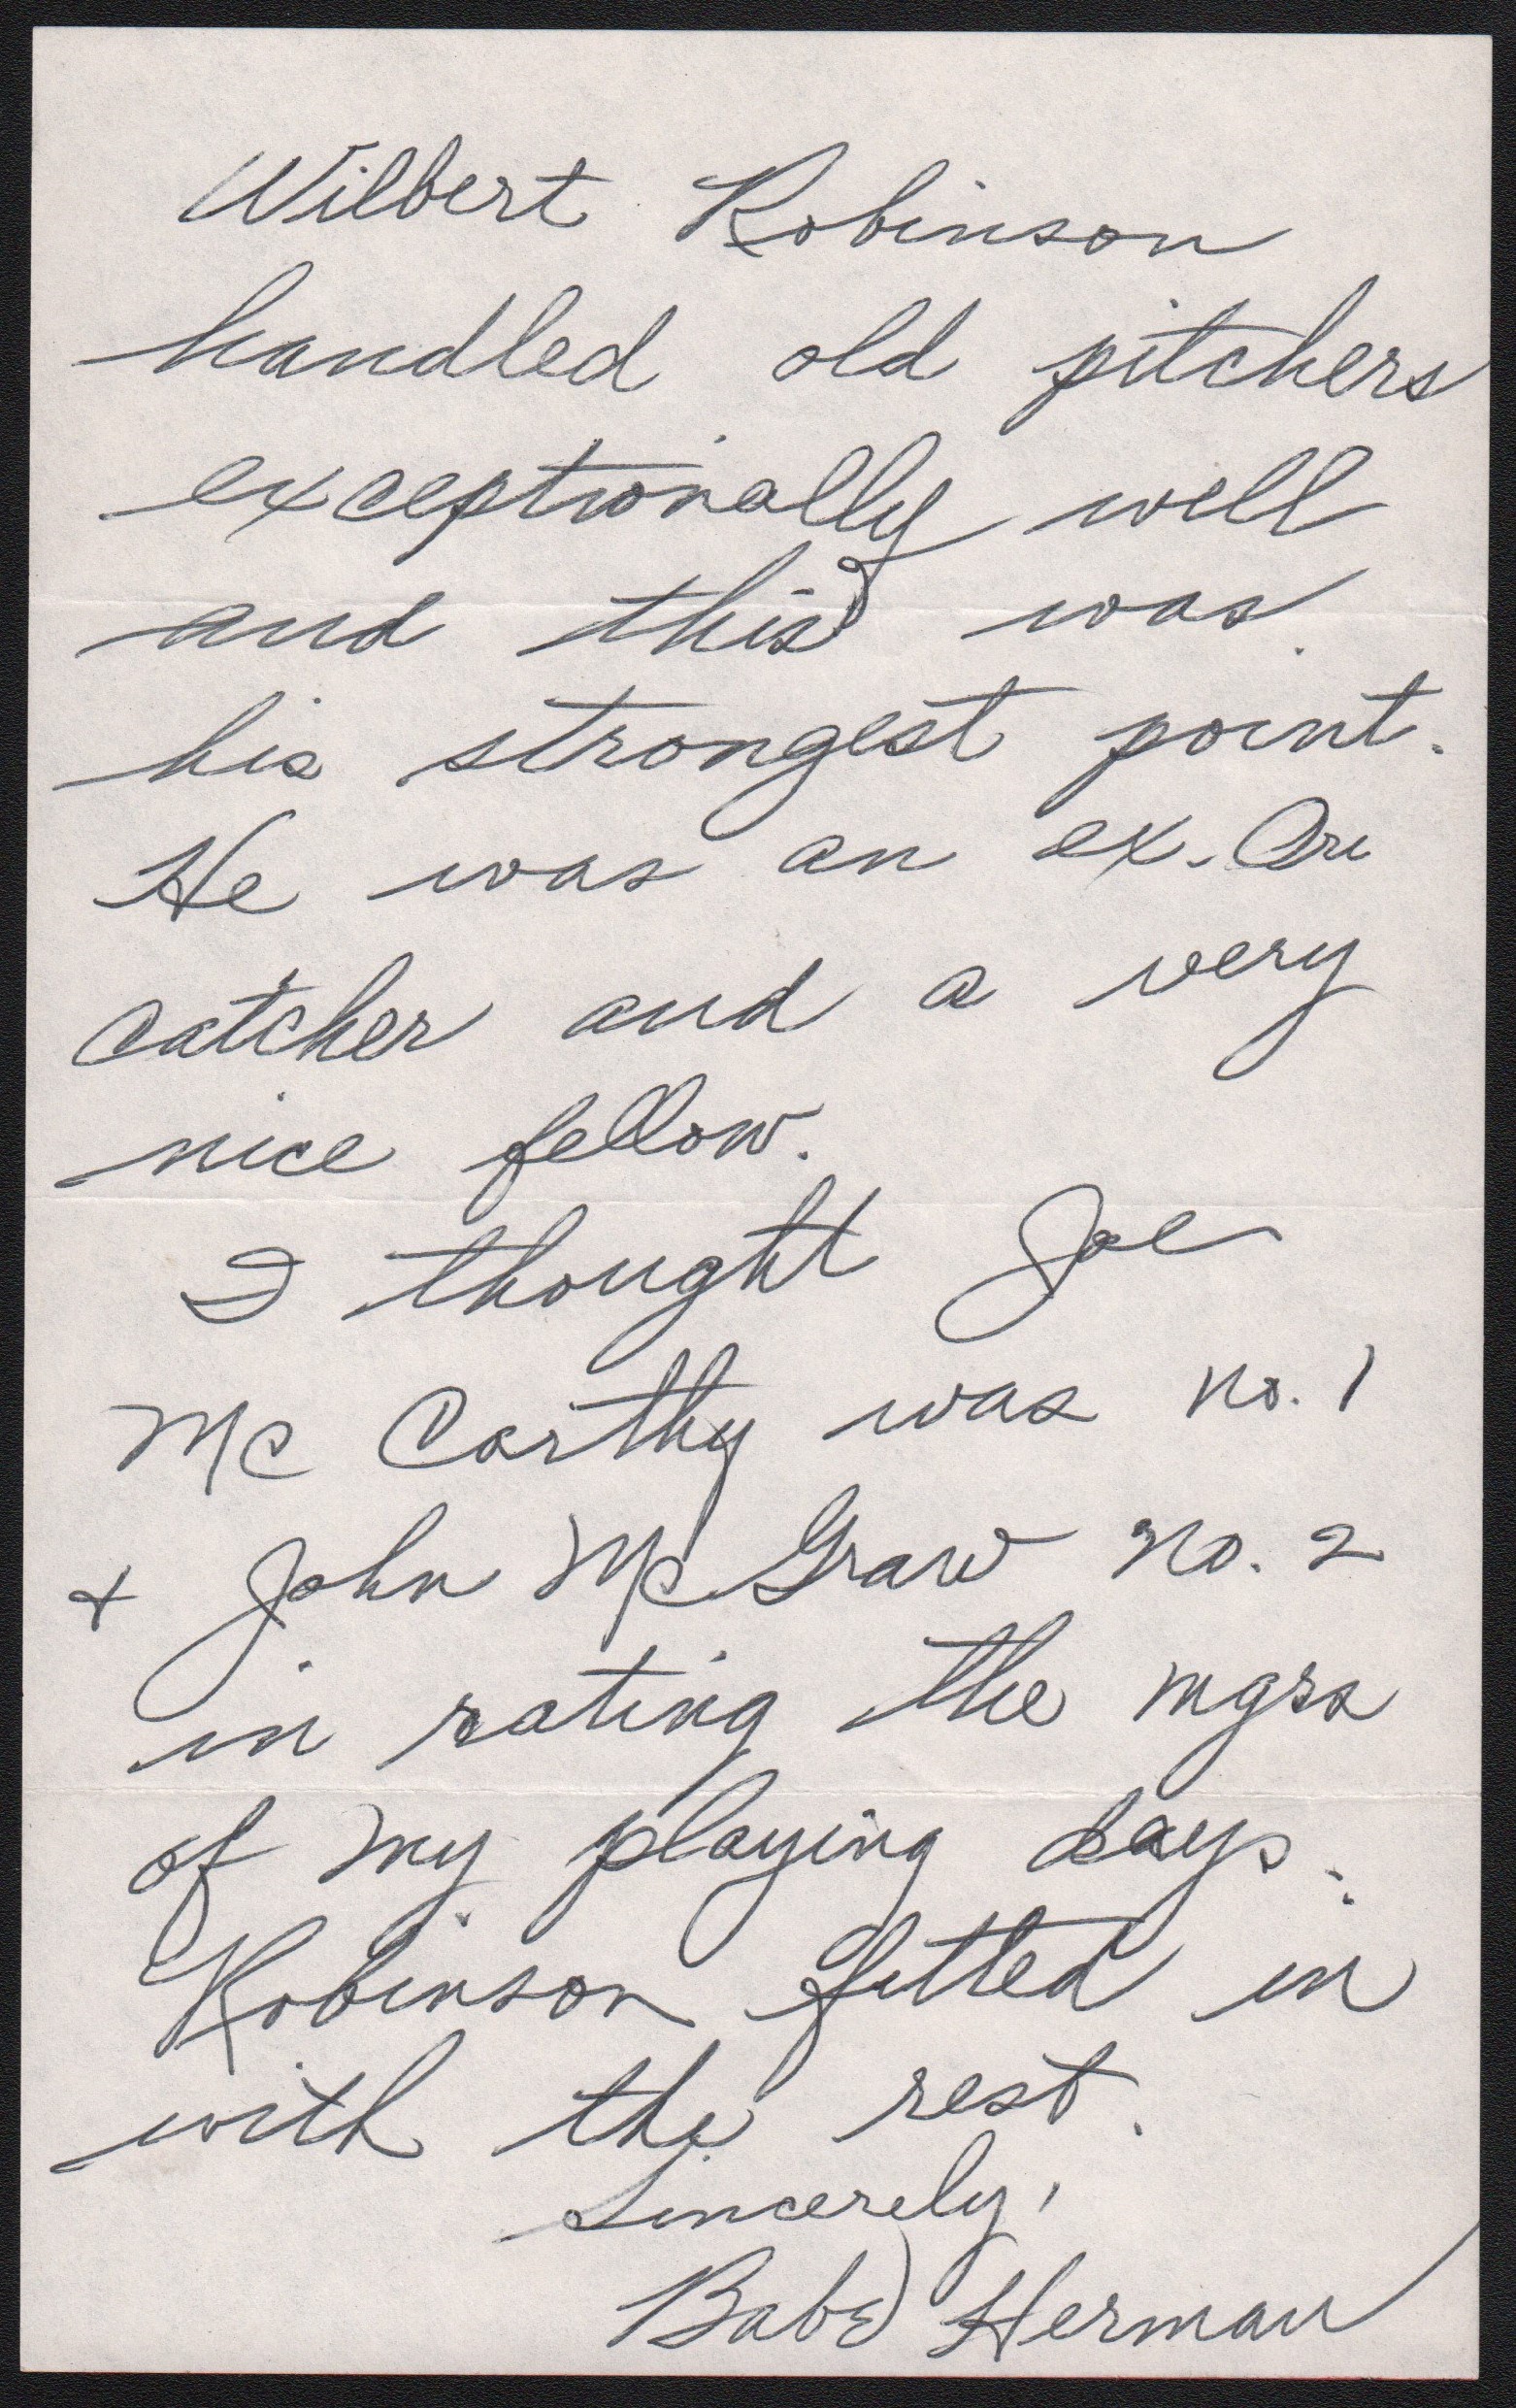 Babe Herman 1-Page Handwritten Letter w/McCarthy & McGraw Content